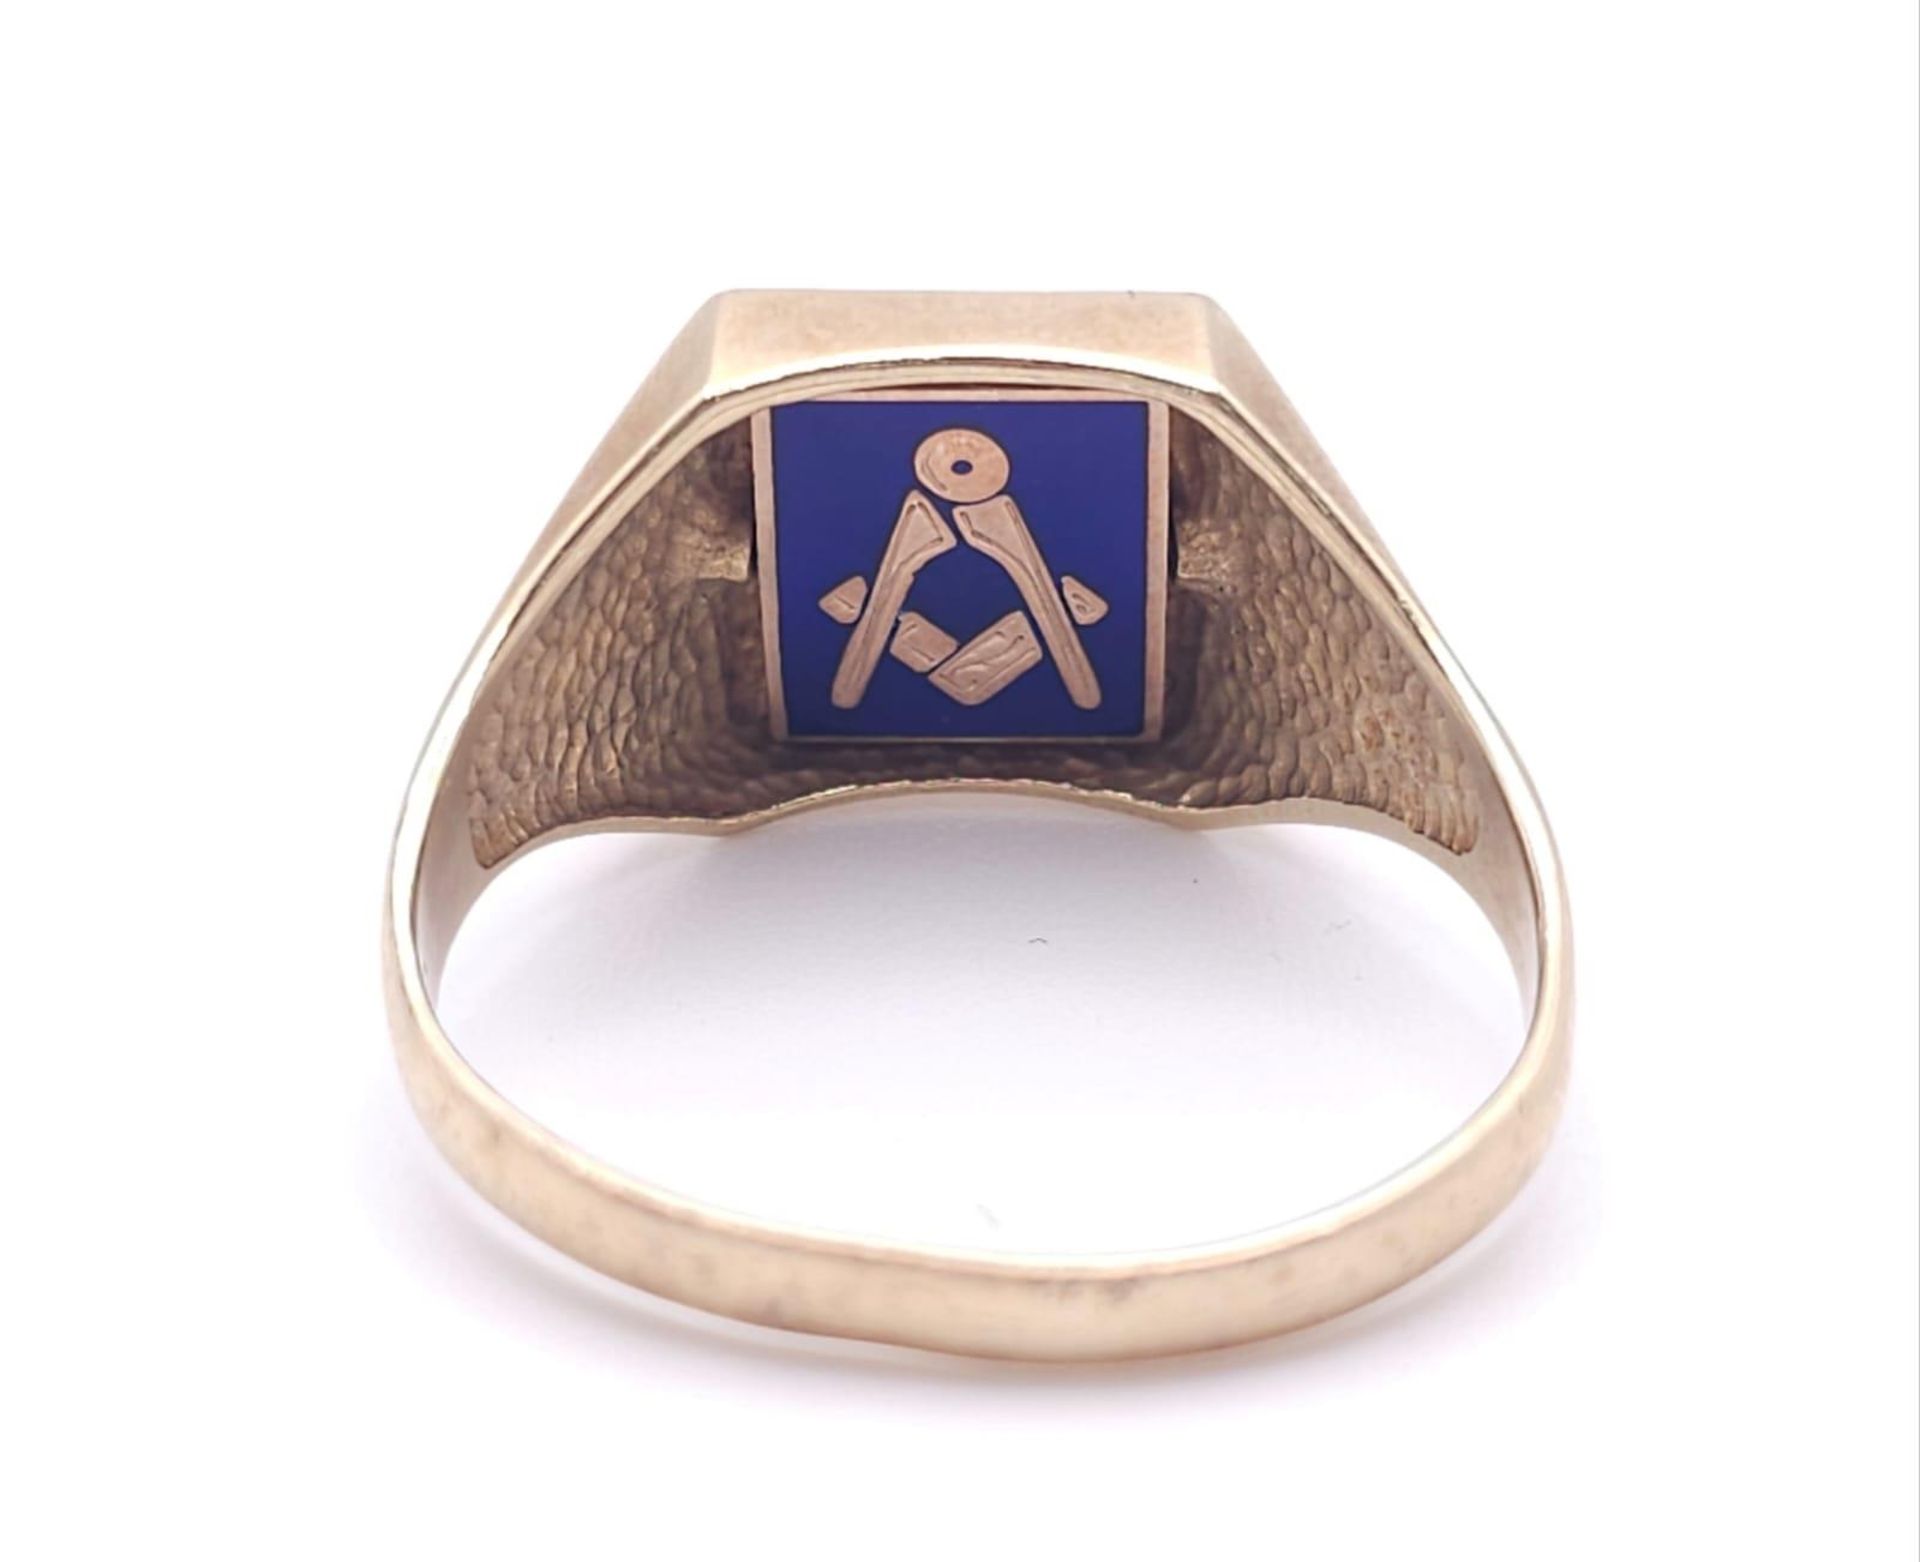 A GENTS 9K GOLD SIGNET RING WITH A HIDDEN MASONIC SYMBOL ON THE REVERSE, ENGRAVED PATTERN - Image 3 of 6